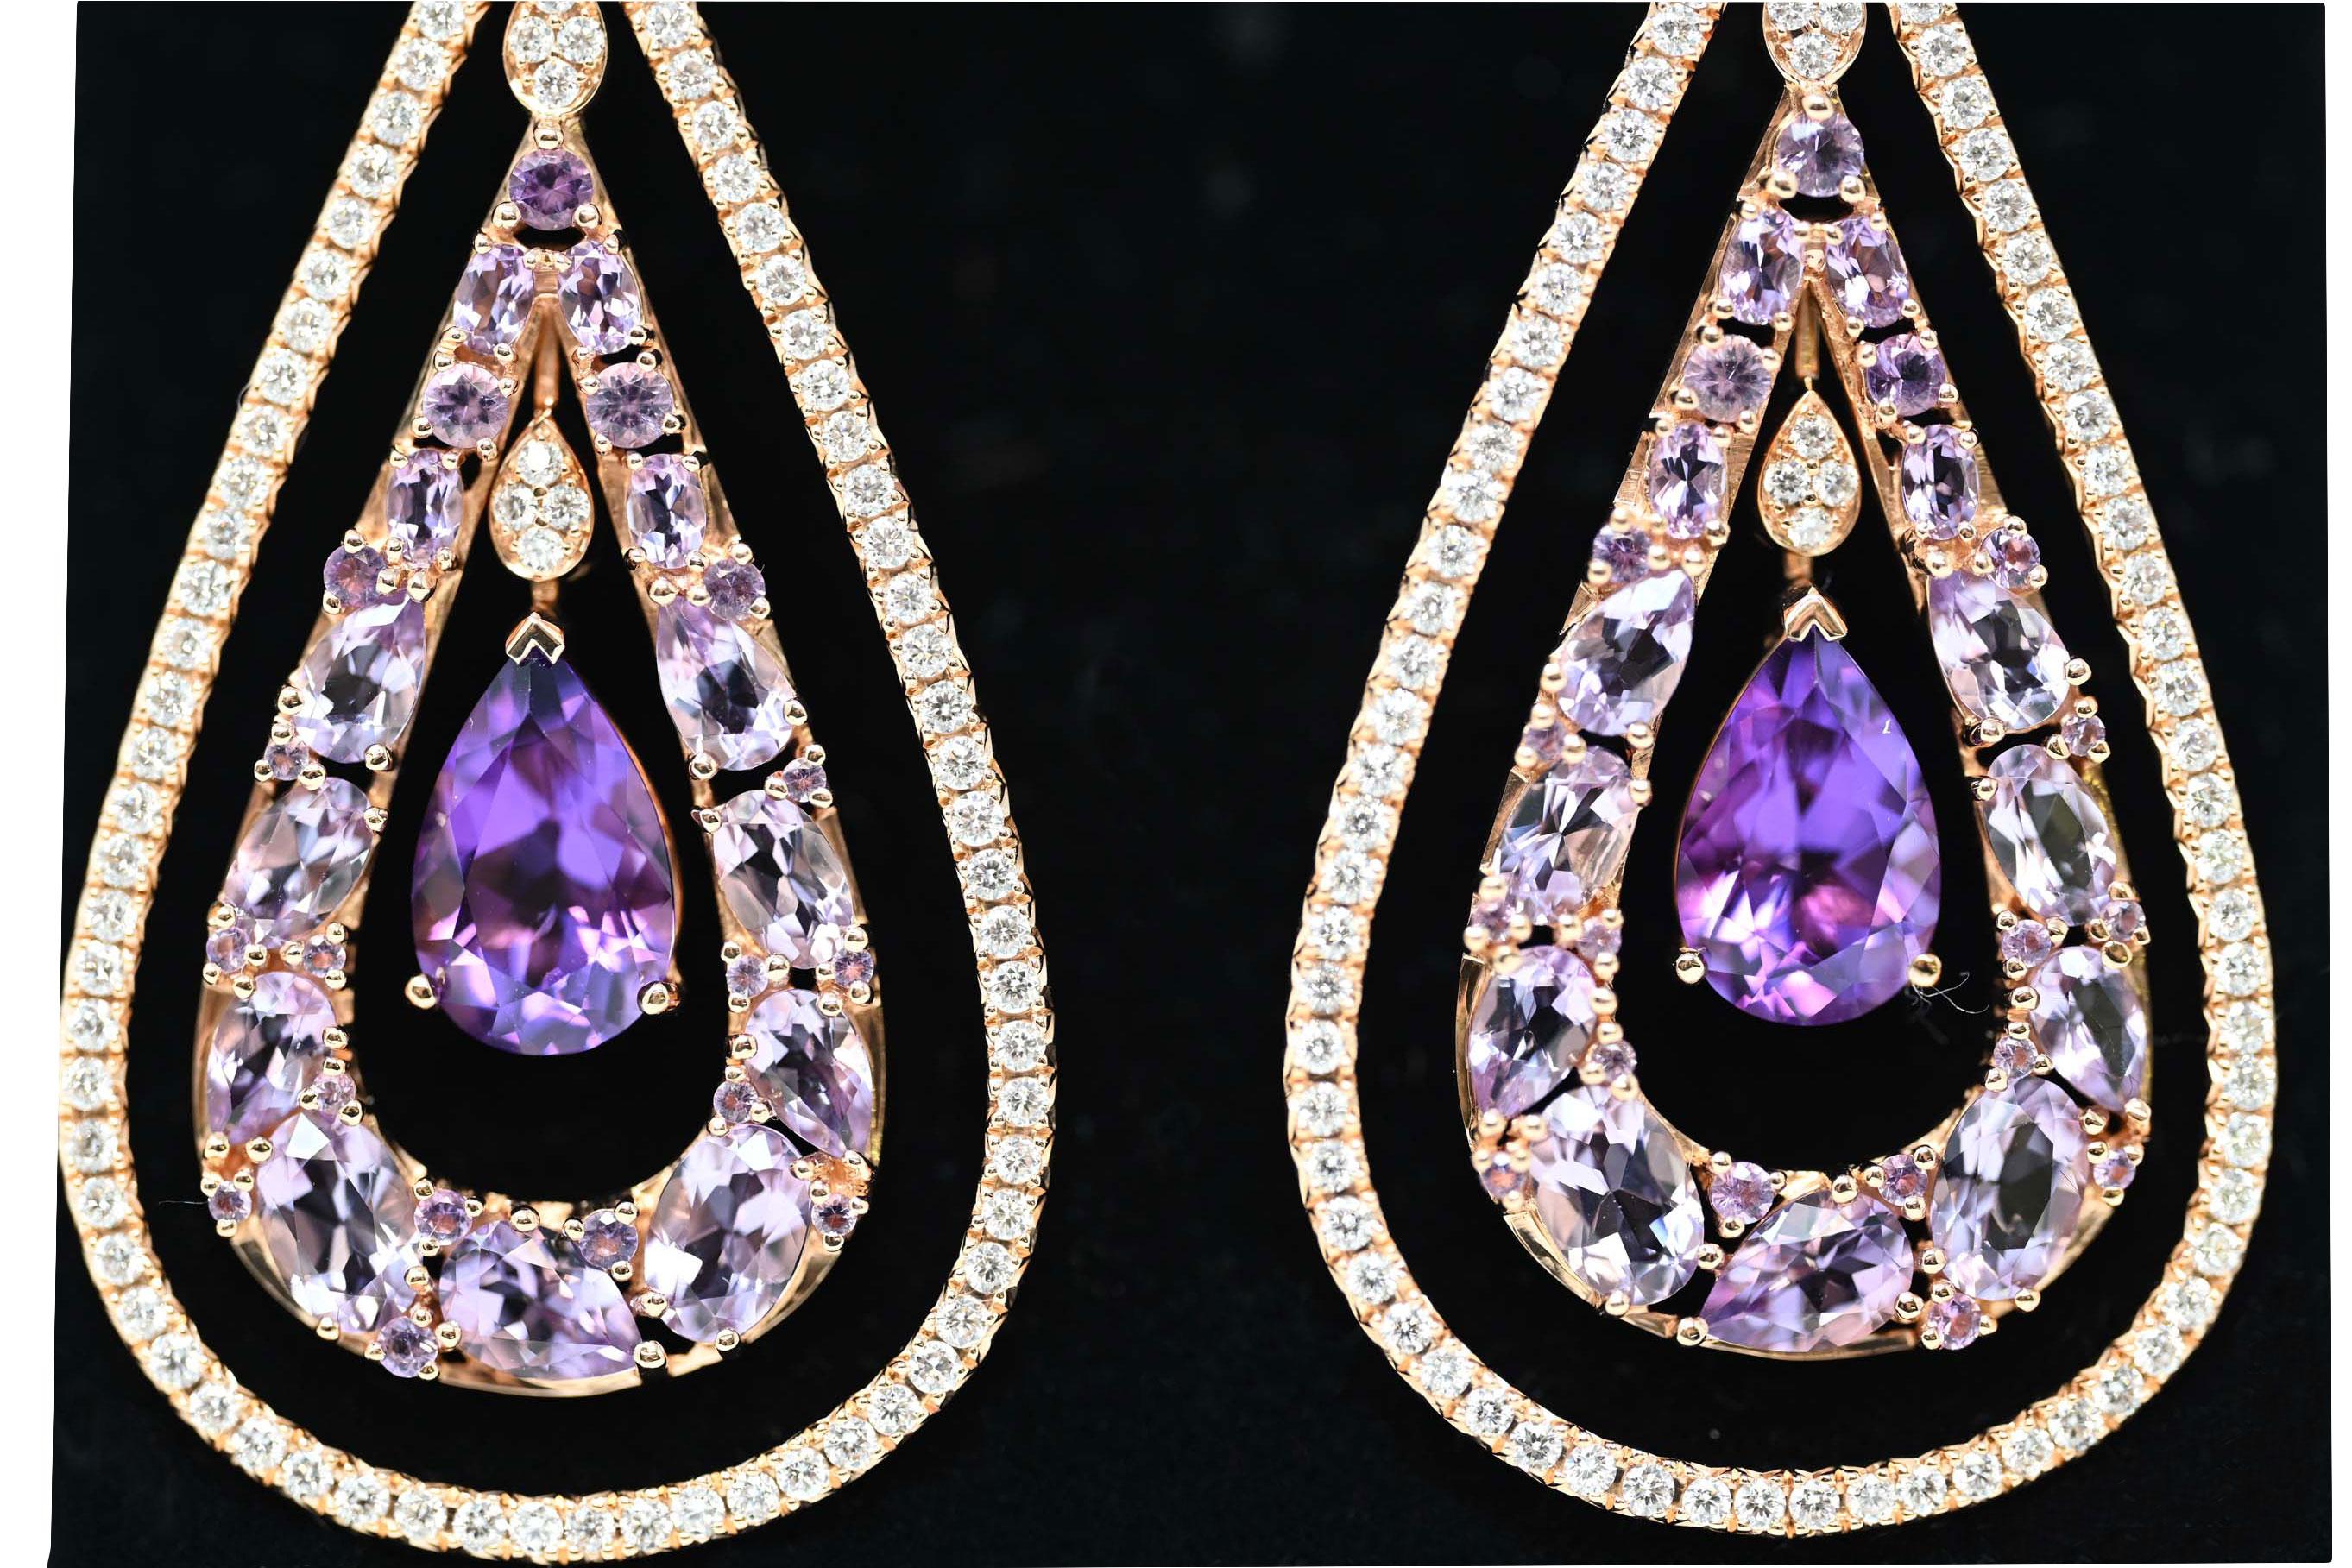 One pair of ear pendants in rose 18 karat gold, pear shaped with omega closing system. Total weight of 22.3 grams. The earrings are set with two hundred round brilliant cut diamonds, average weight 0.01 carat each, total weight 2.00 carats.